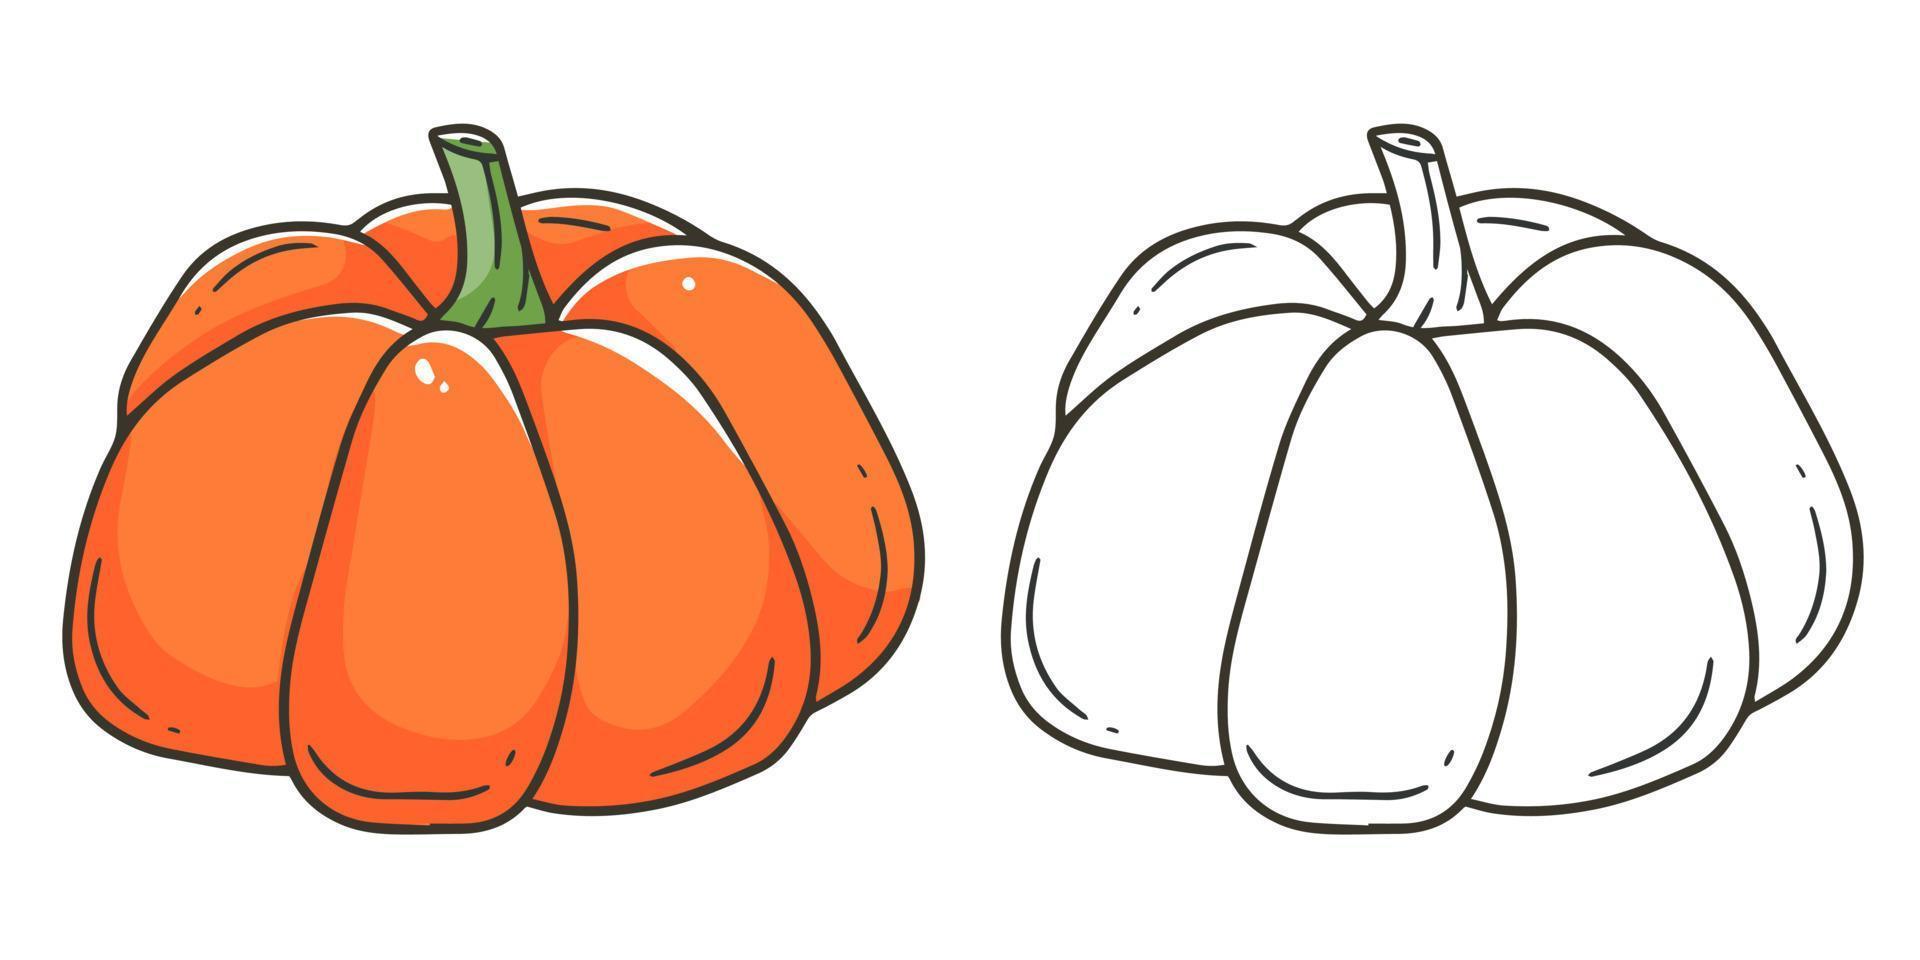 Pumpkin coloring book with an example of coloring for children. Coloring page with vegetable. Monochrome and color version. Vector children's illustration.